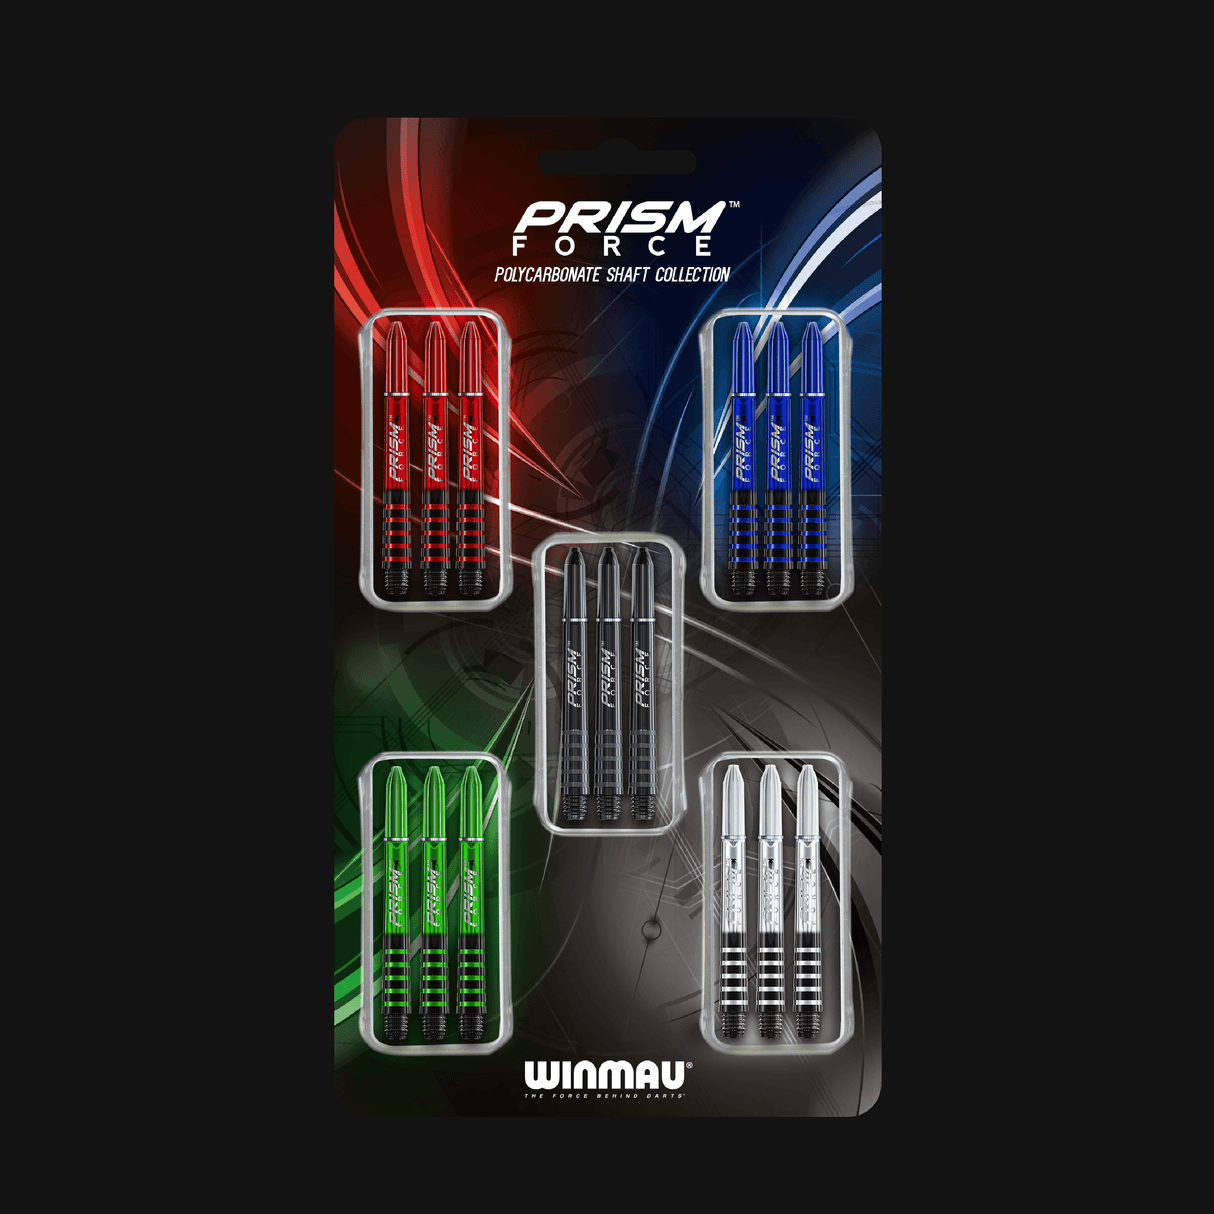 Winmau prism force dart shaft collection